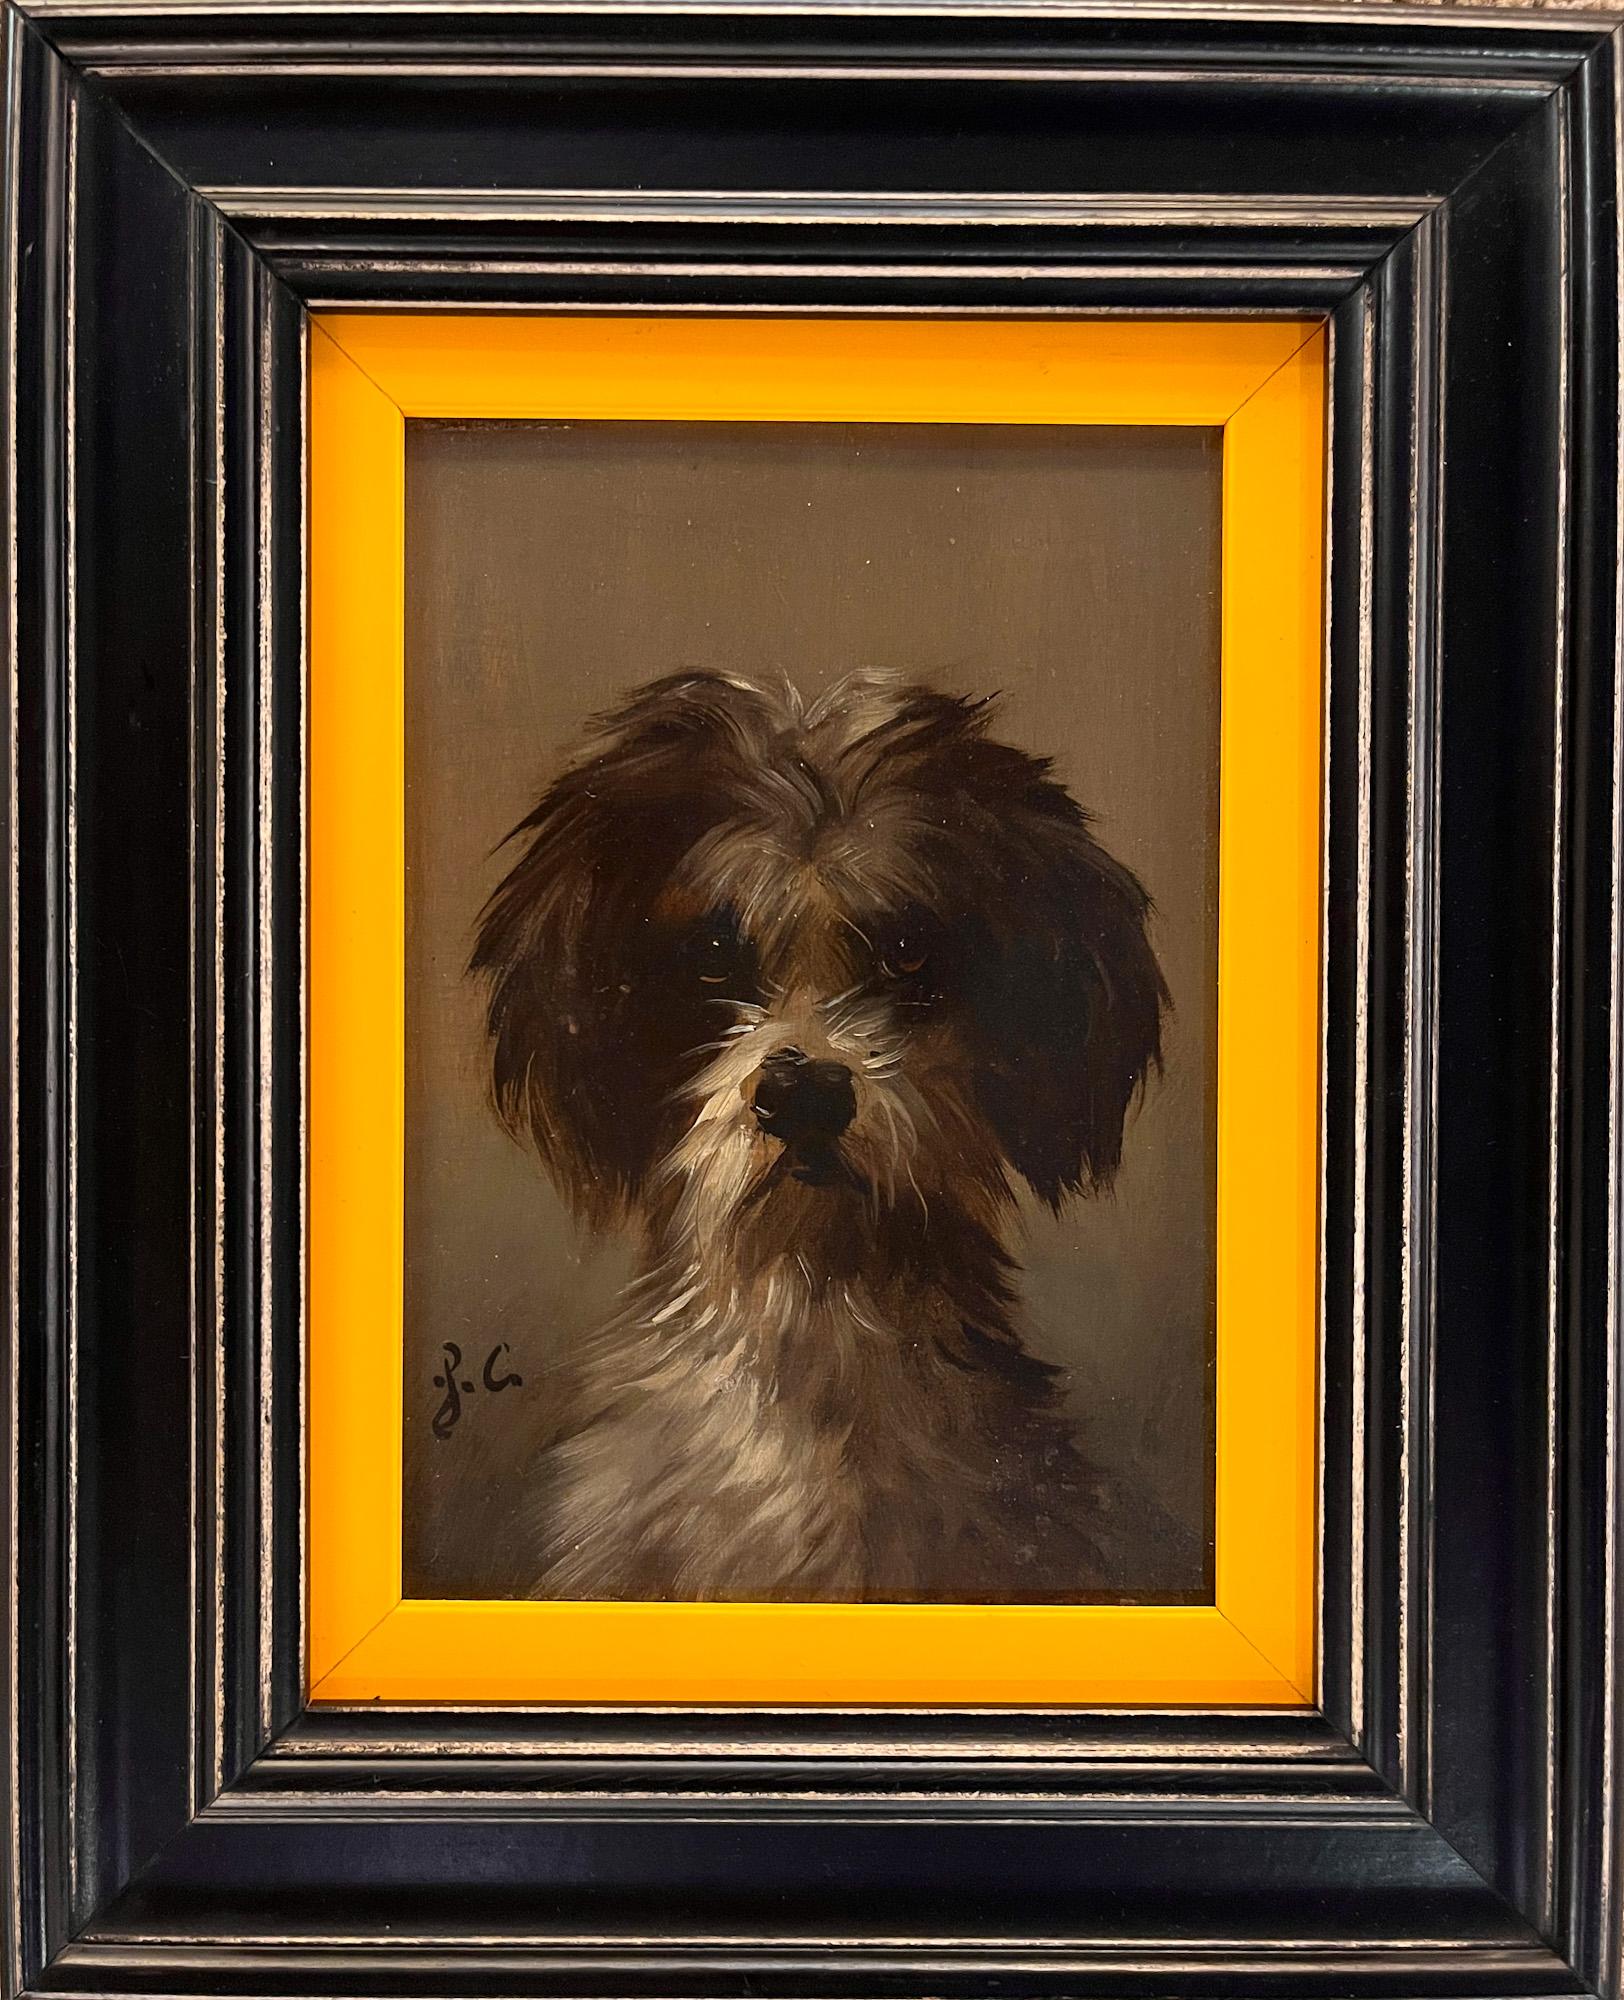 Who is famous for painting dogs?